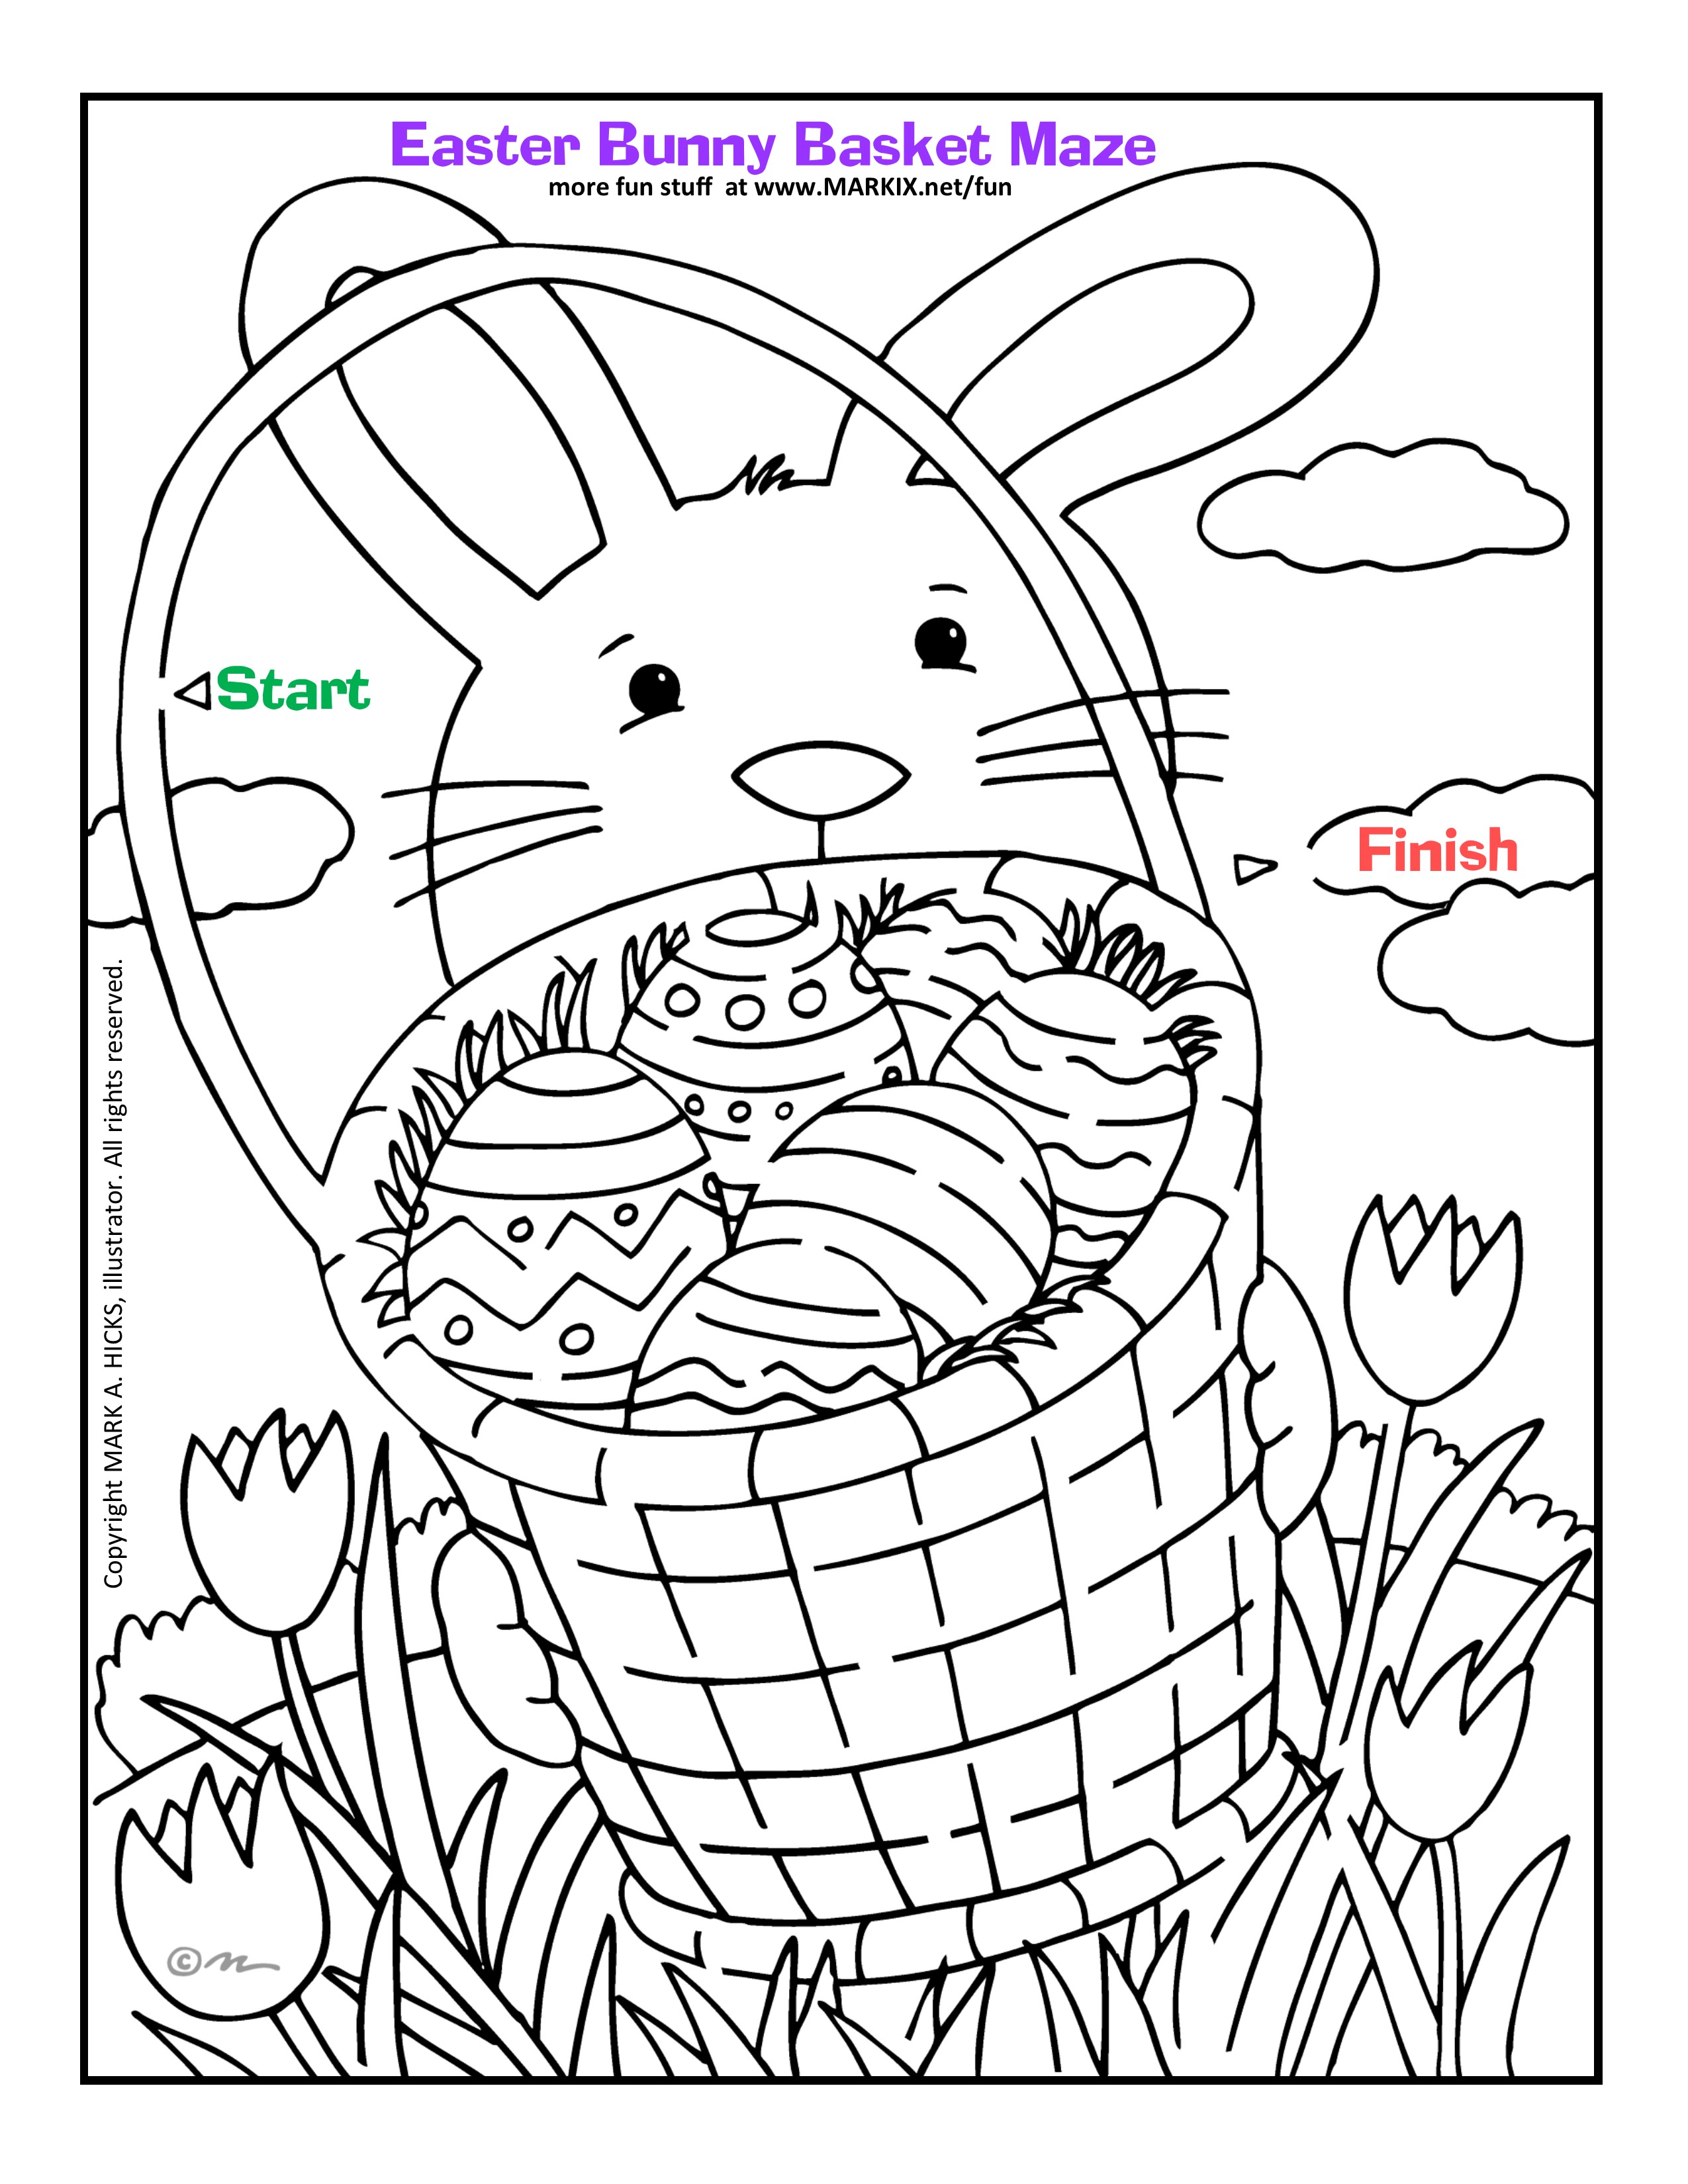 Easter Bunny Basket Maze and Coloring Page